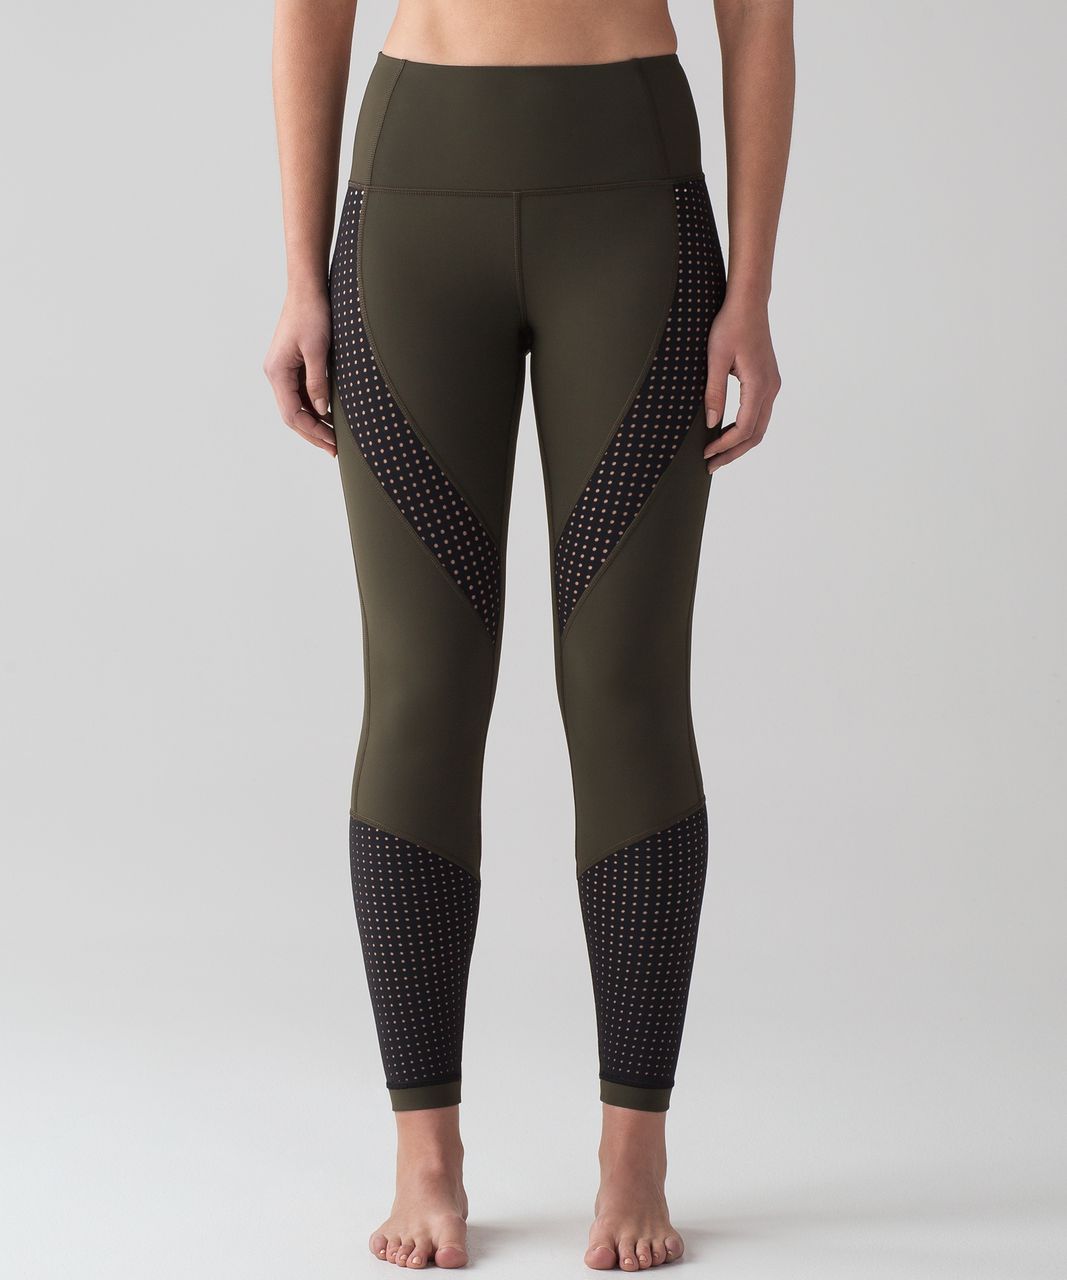 Where Is the Lululemon Logo on Leggings? Find Out Here! - Playbite